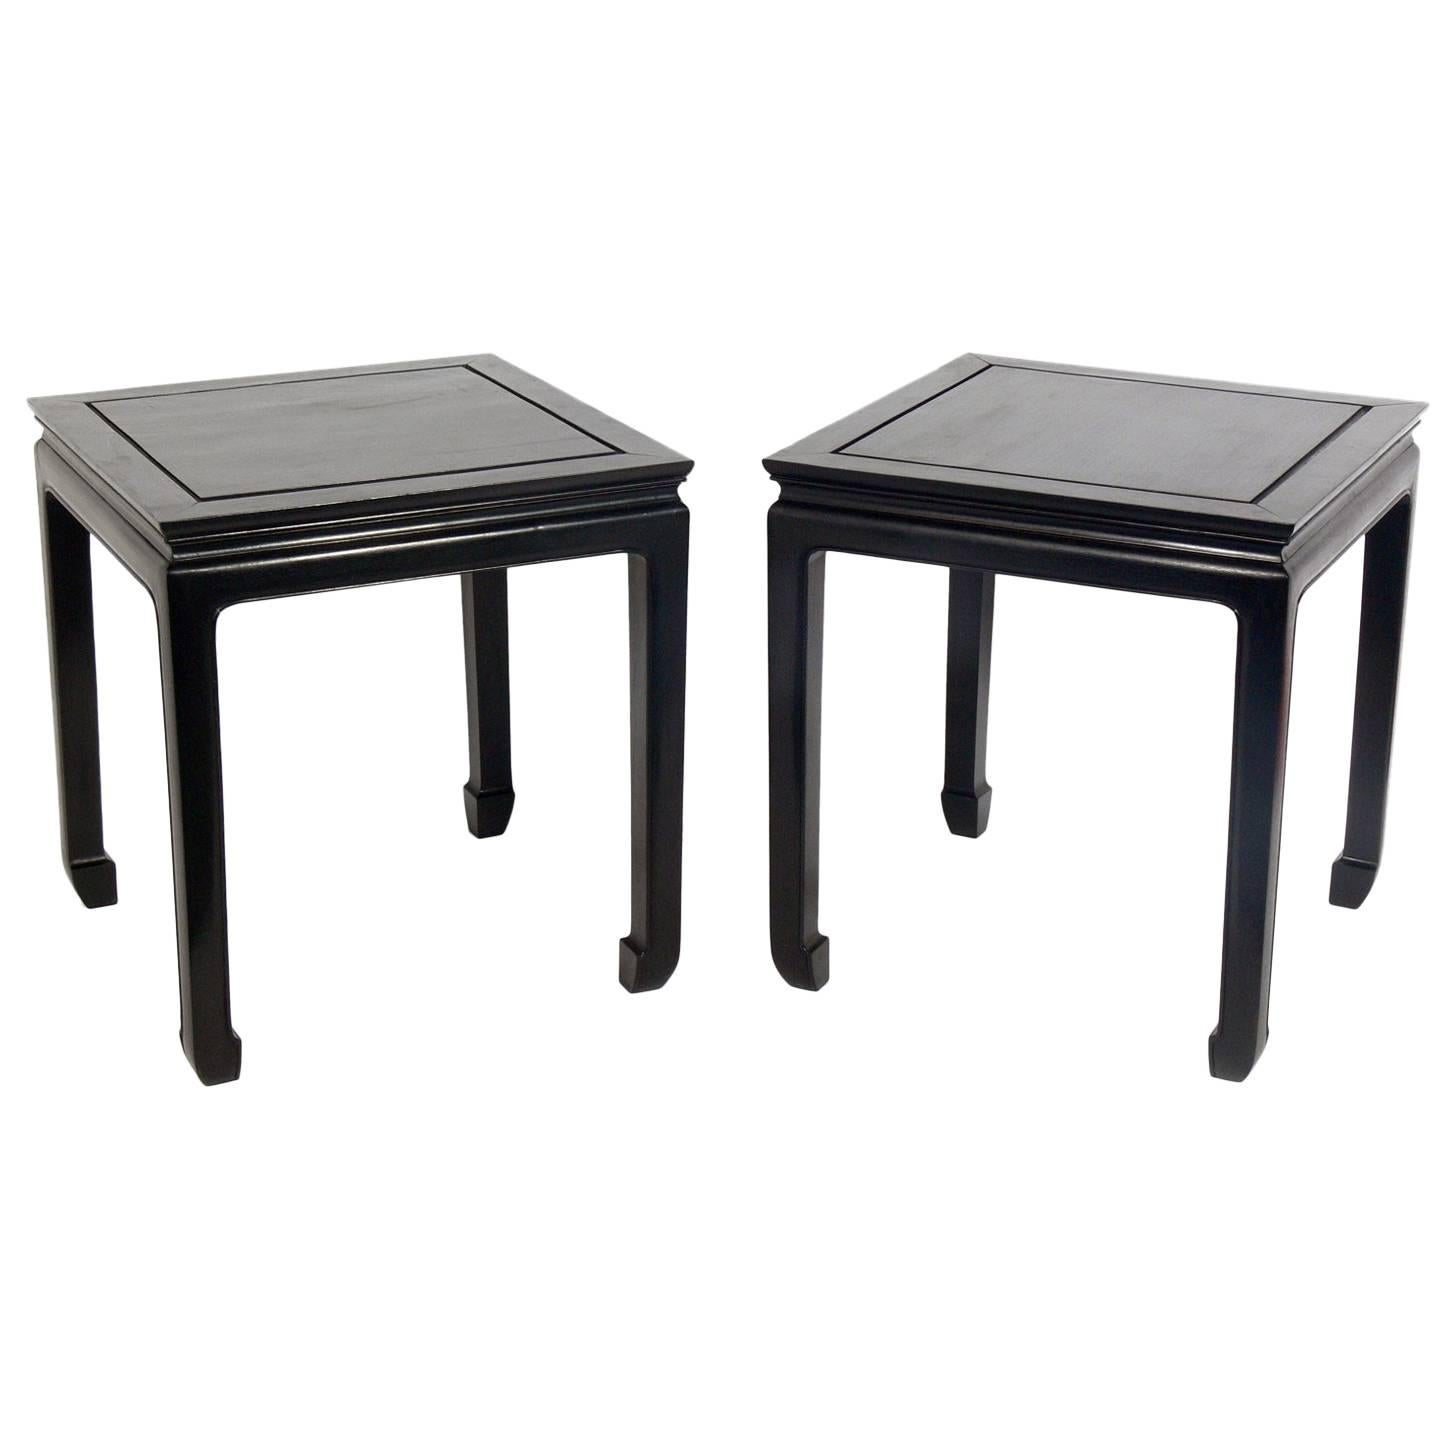 Pair of Asian Influenced End Tables or Nightstands